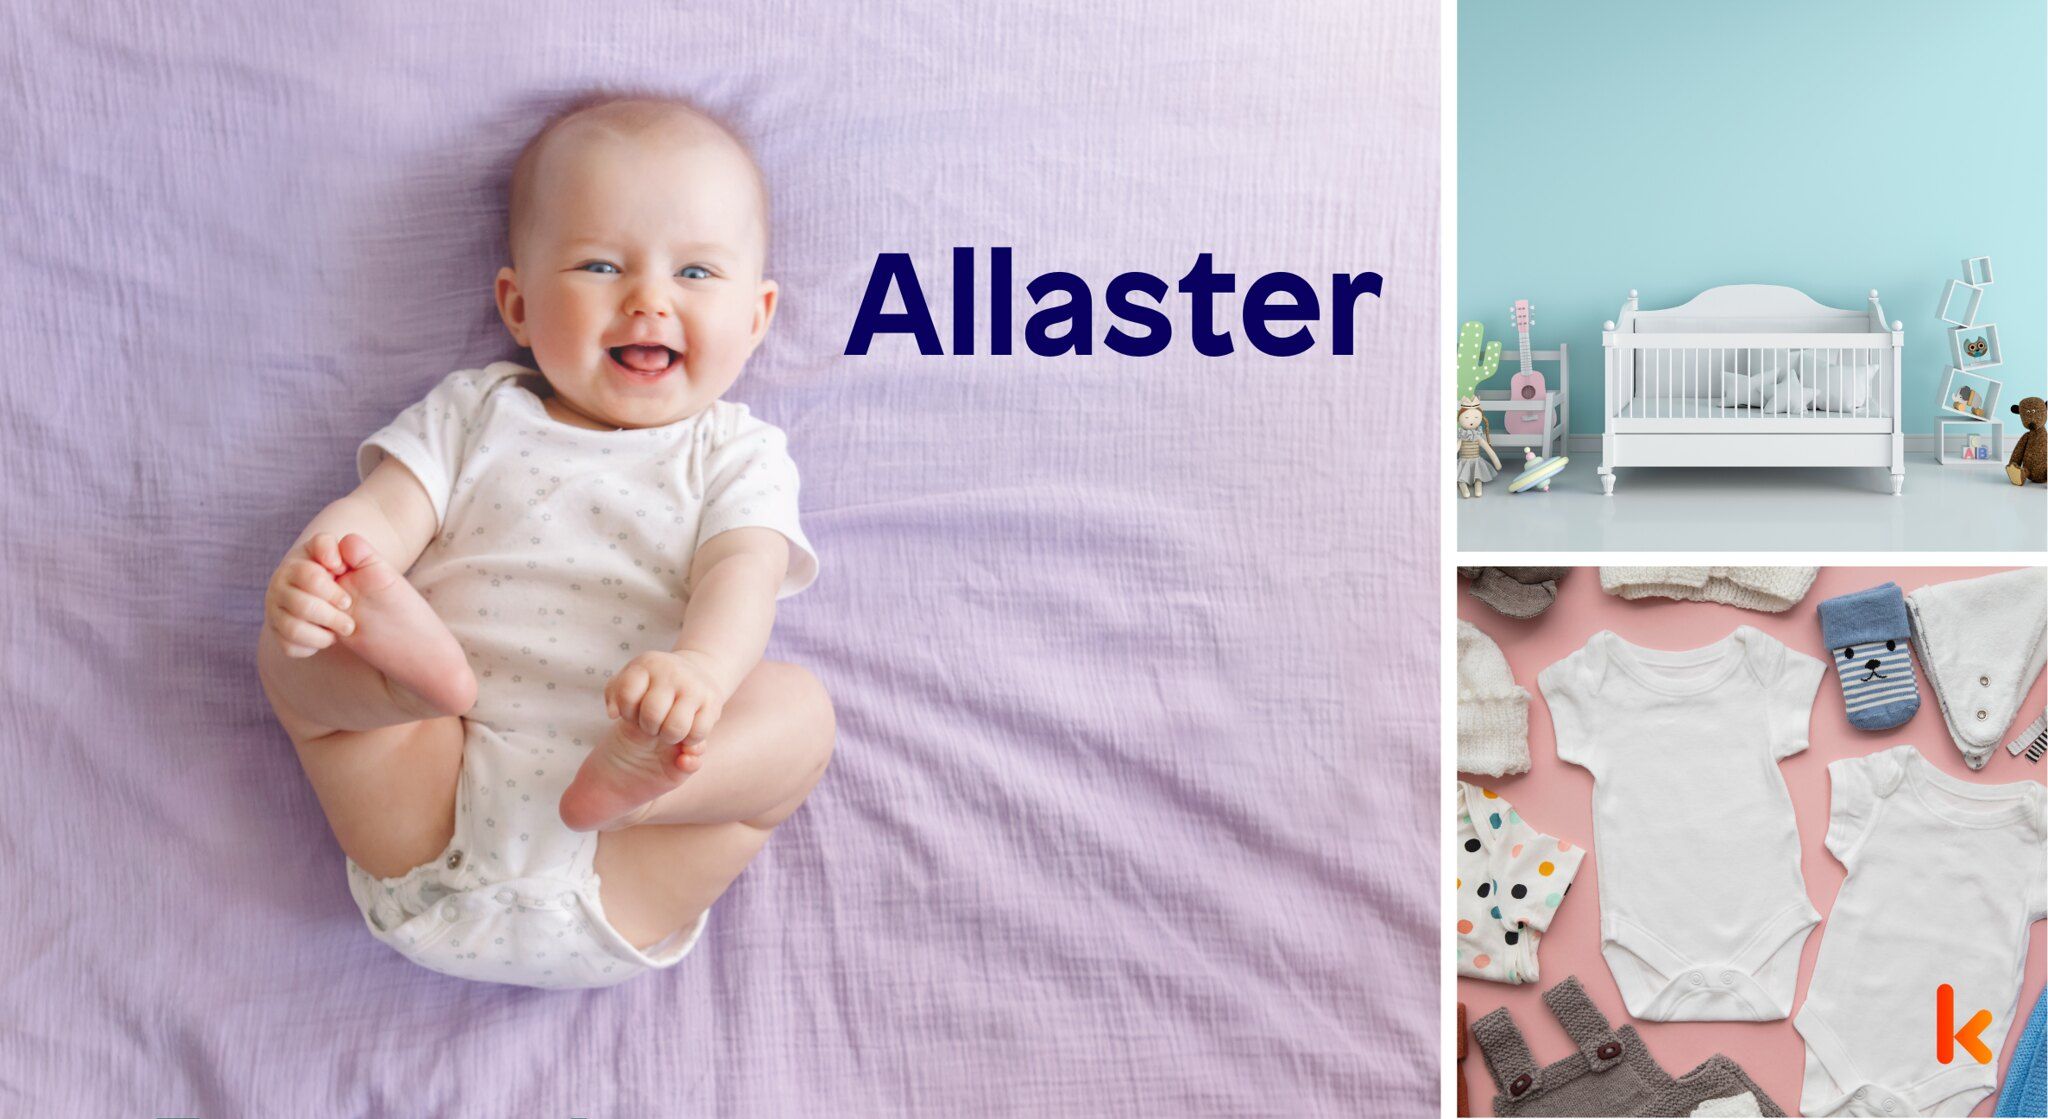 Meaning of the name Allaster